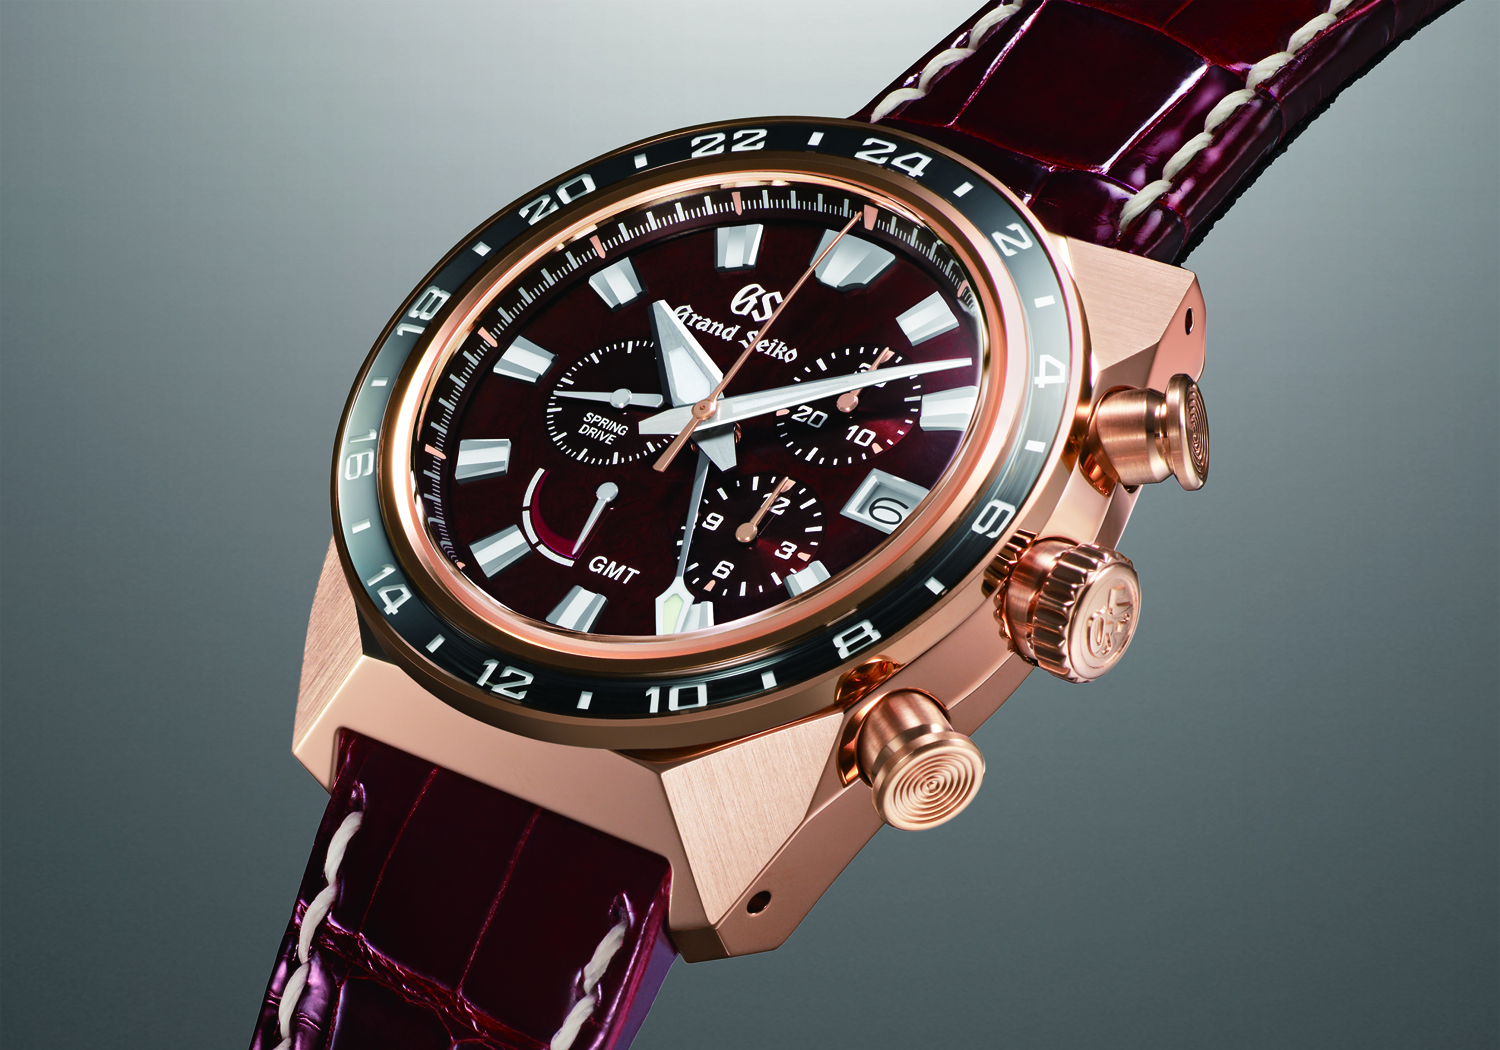 Grand Seiko shifts into mechanical sports watches housing its Spring Drive  movement